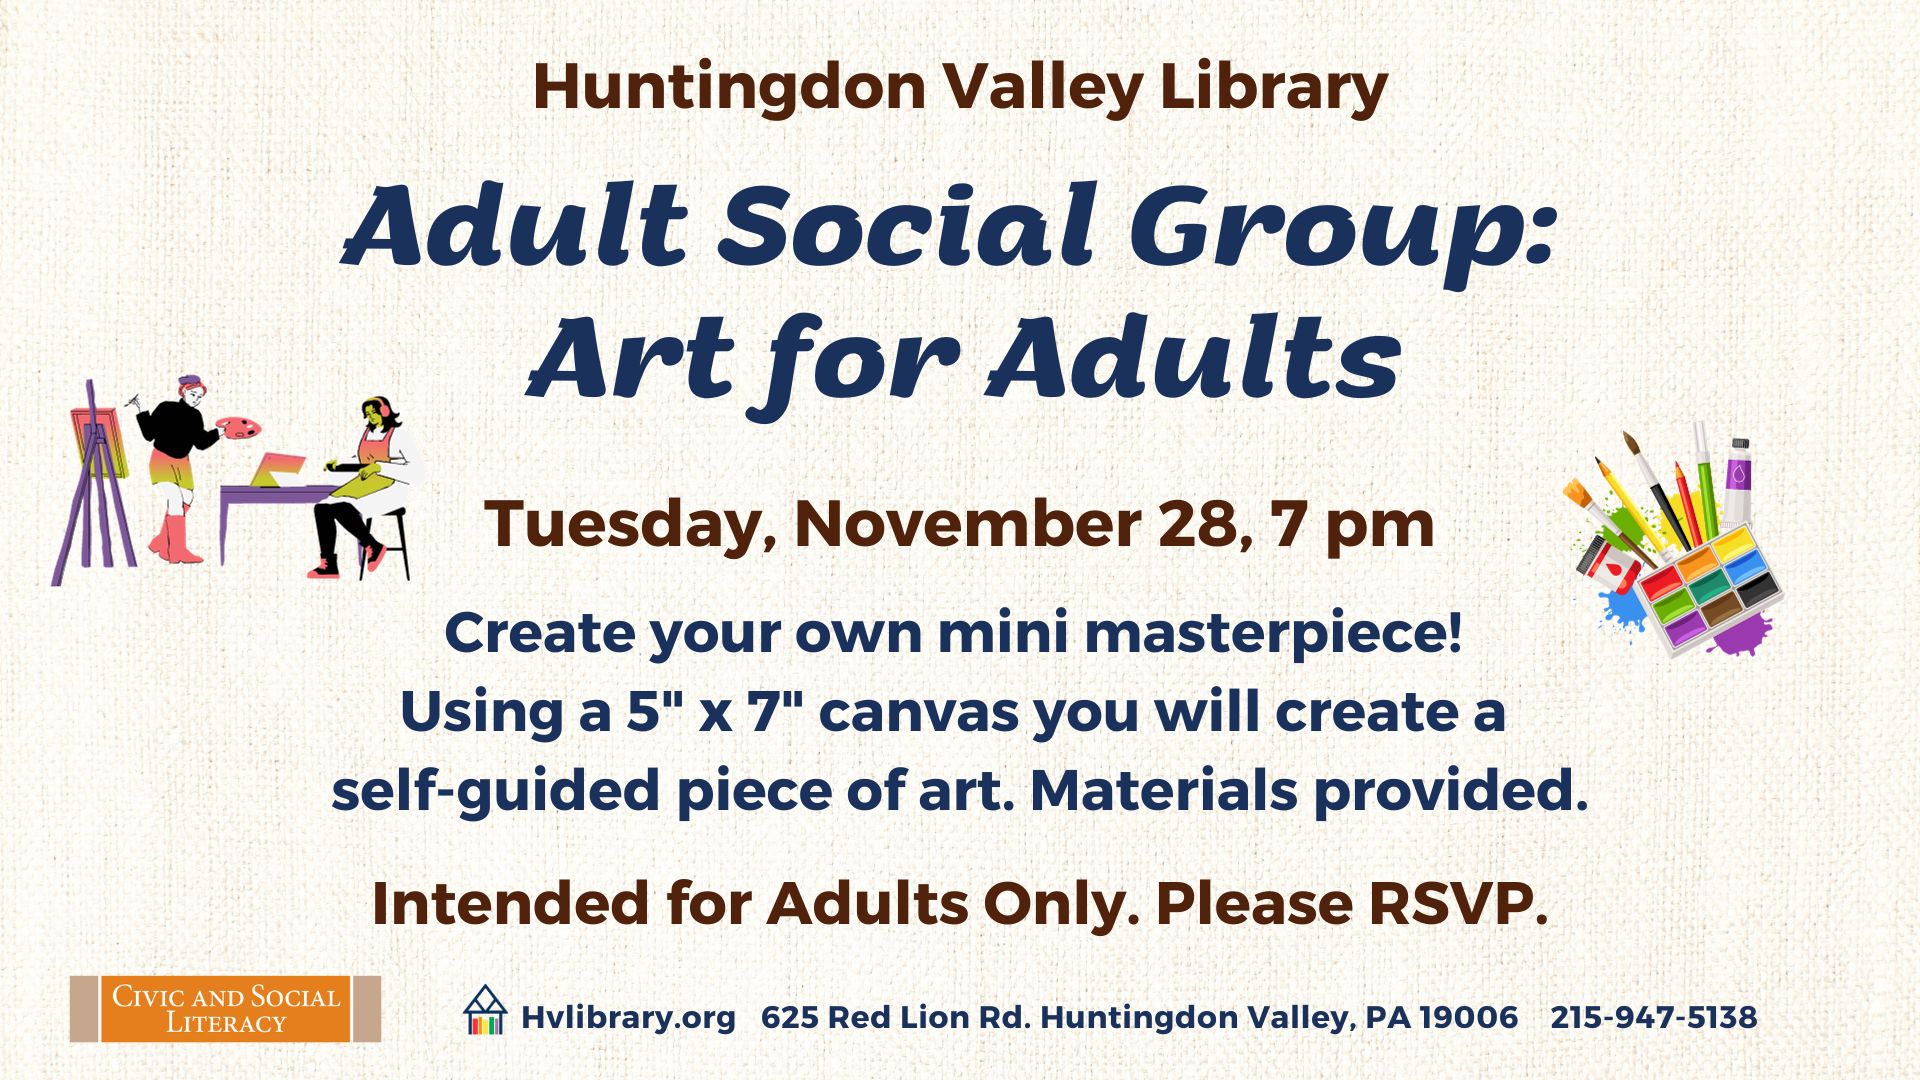 Adult Social Group: Art for Adults, Tues., Nov. 28, 7 pm